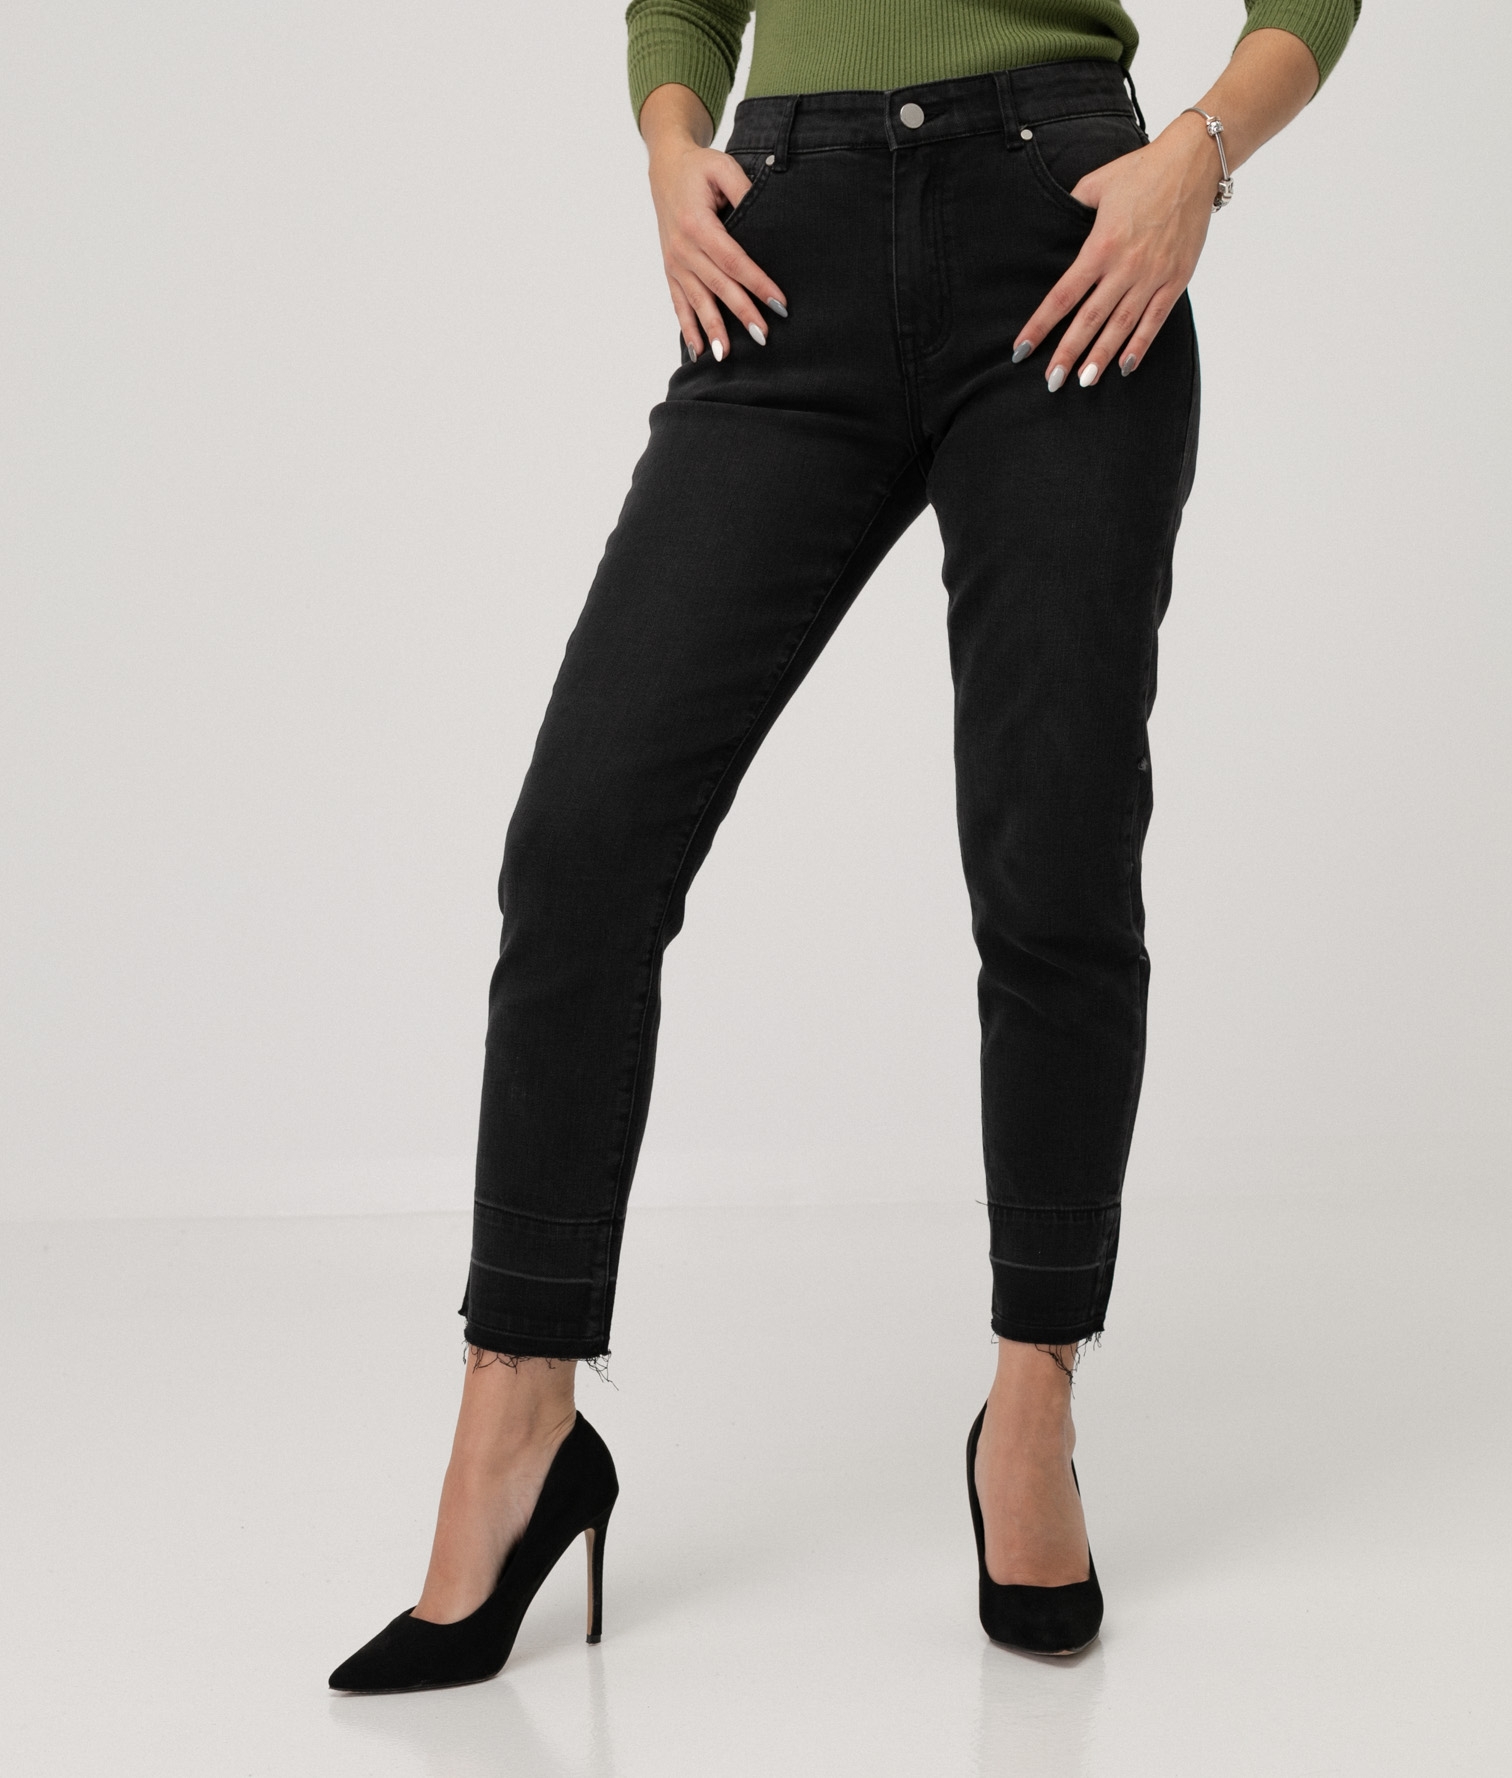 LESLY TROUSERS - BLACK